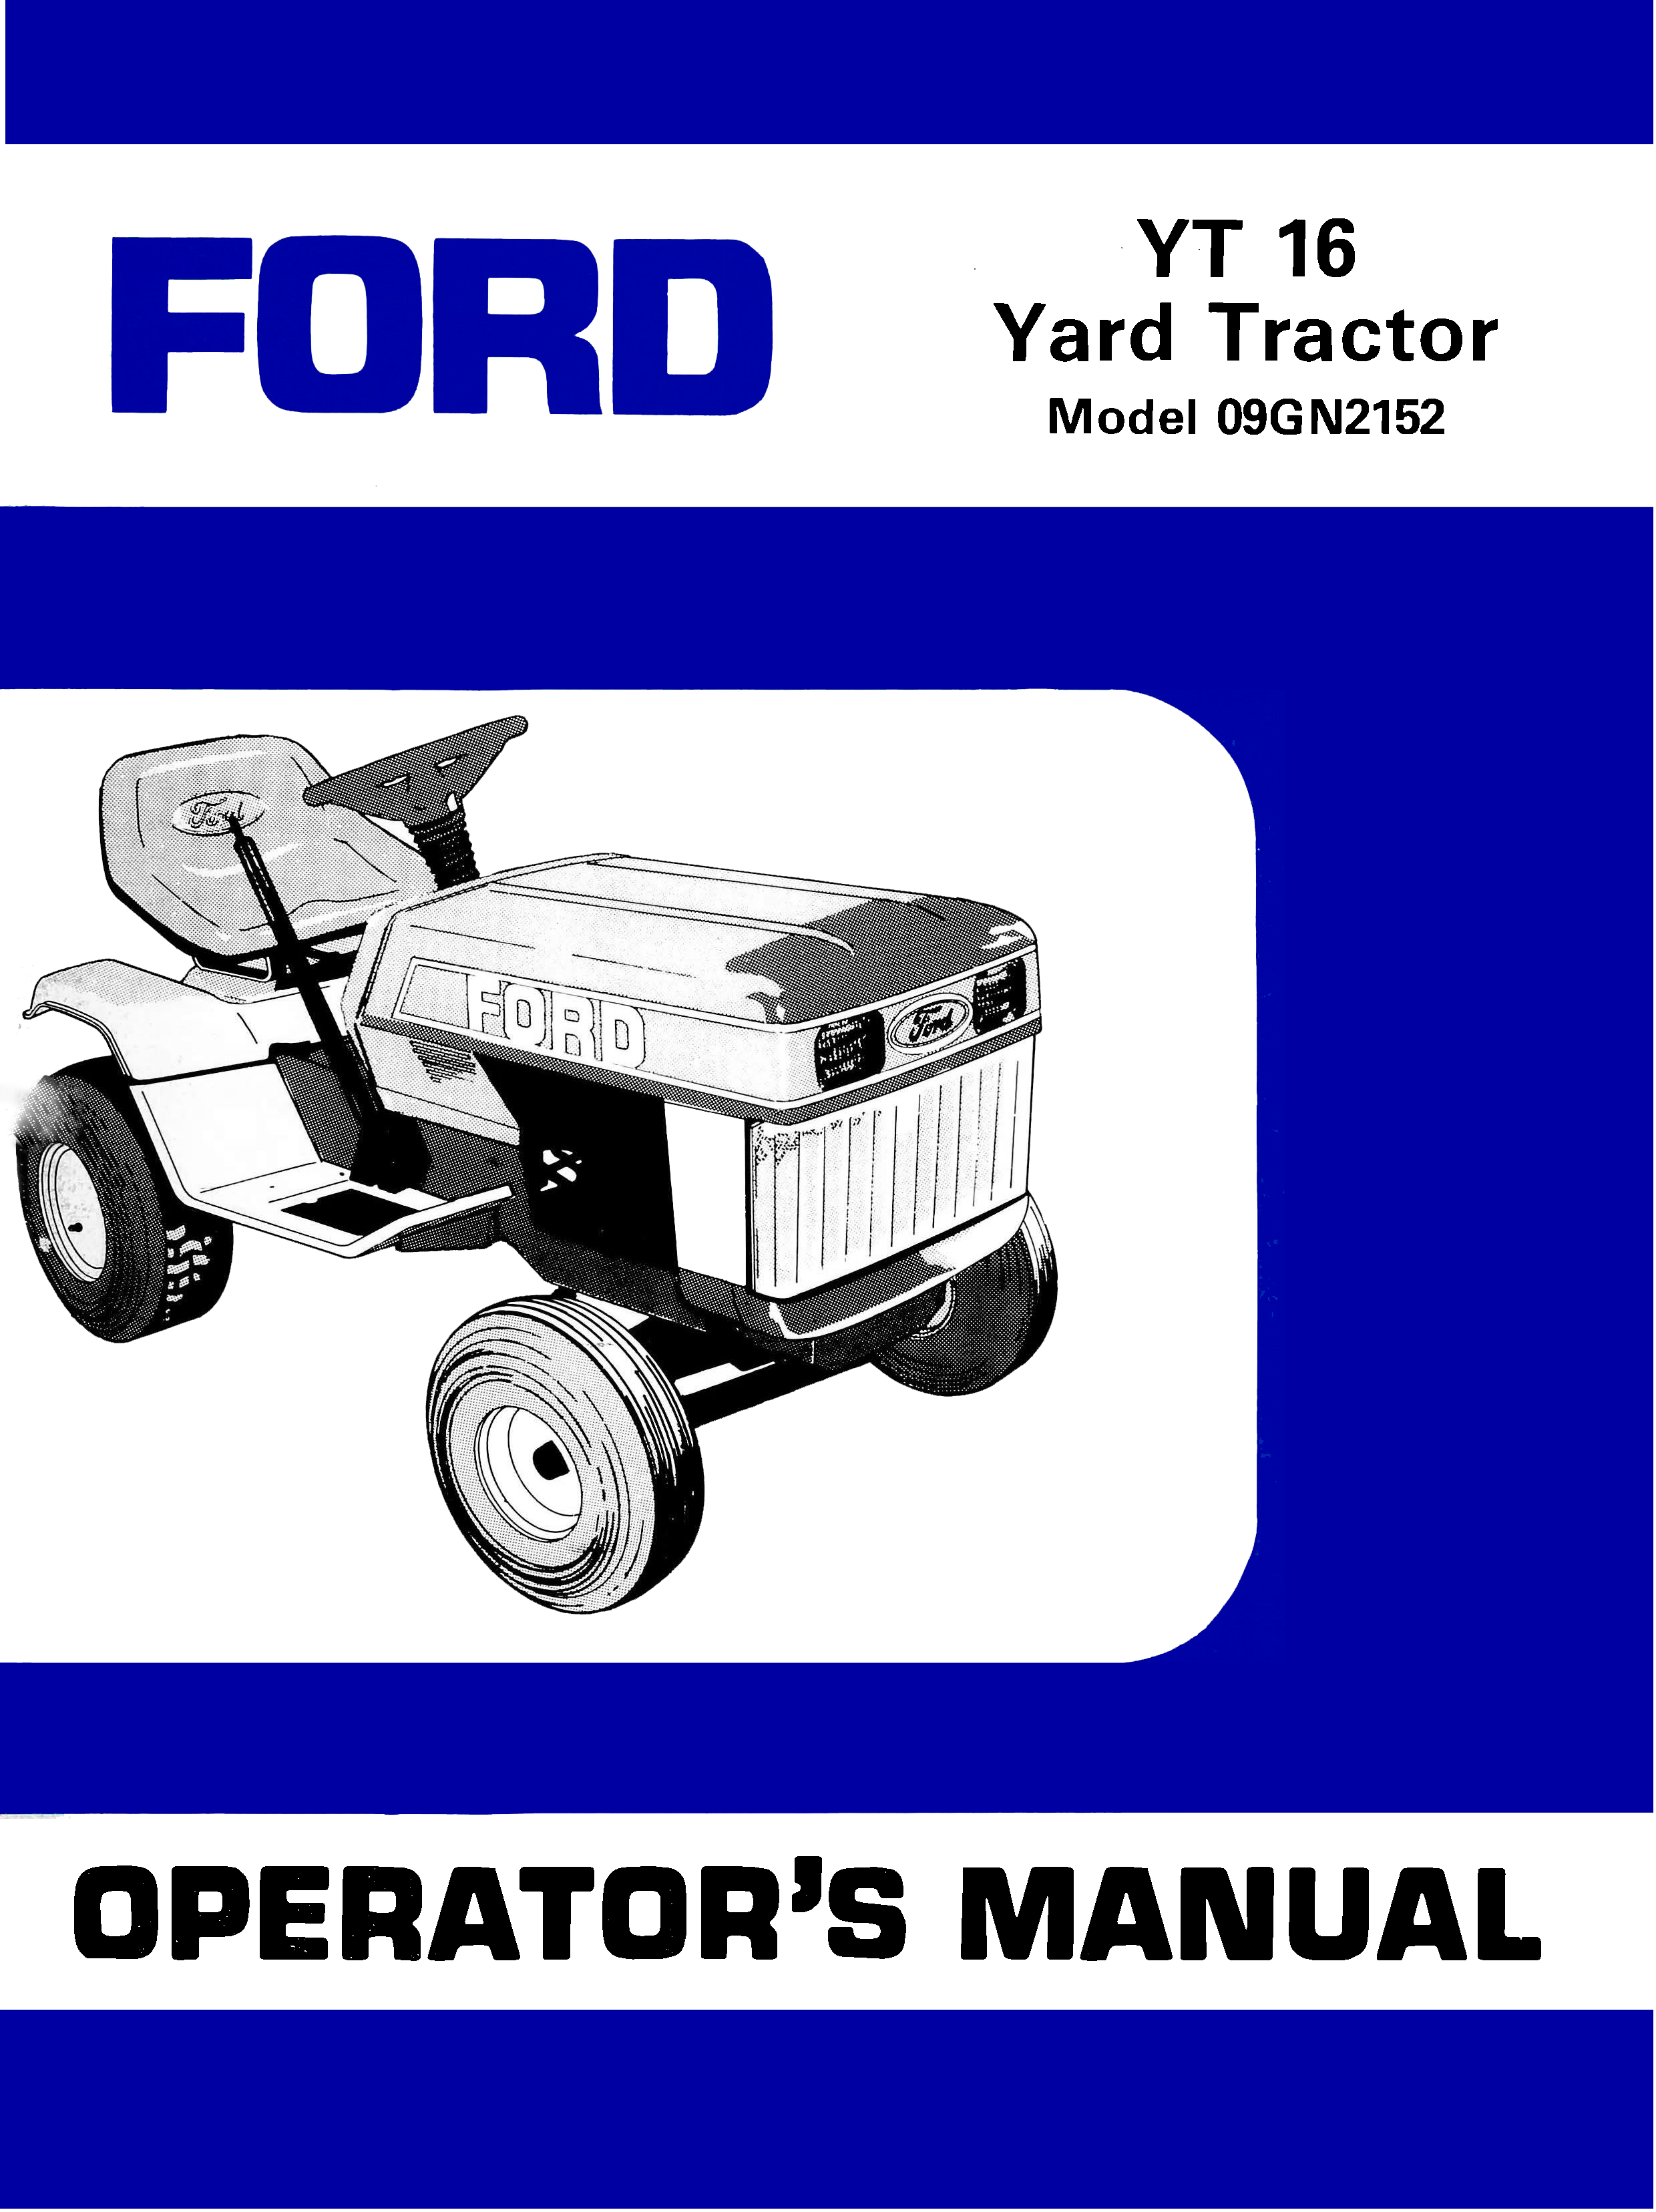 Ford YT 16 Yard Tractor Operator's Manual - download